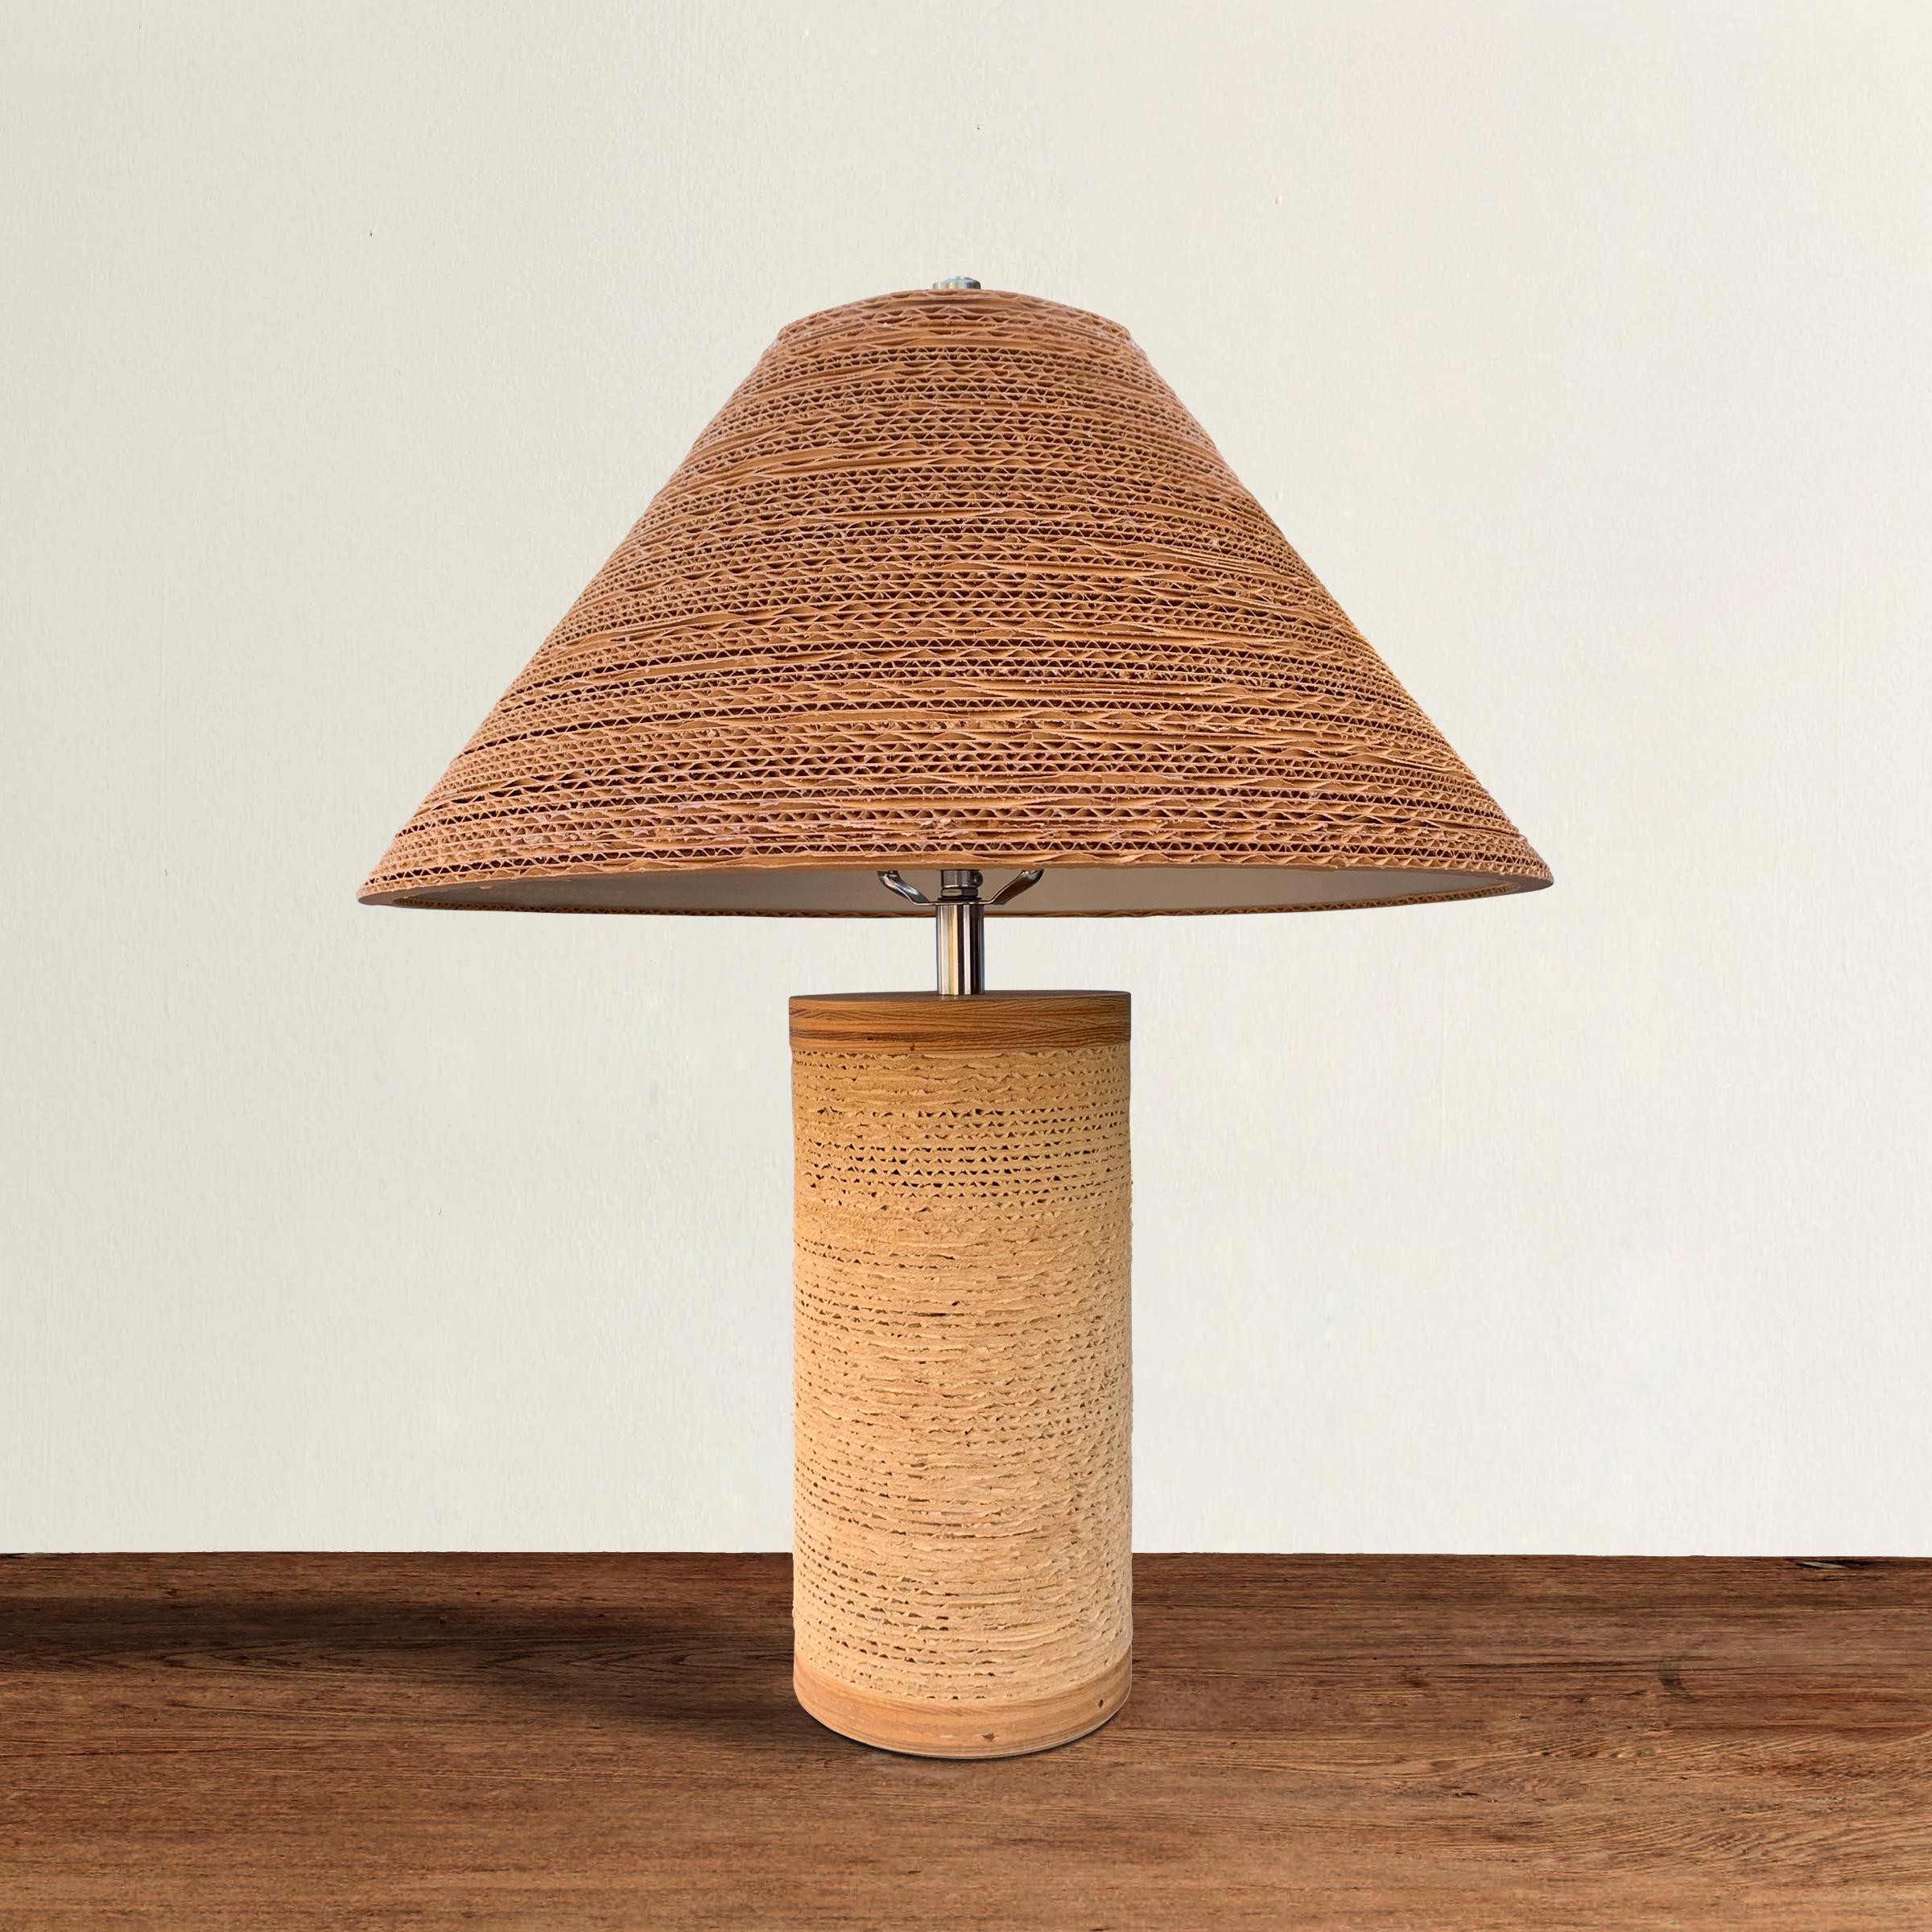 A playful but chic 1970s Gregory Van Pelt designed corrugated cardboard table lamp with a flared cardboard shade, and a cylinder body with laminated maple wood ends. Wired for US.